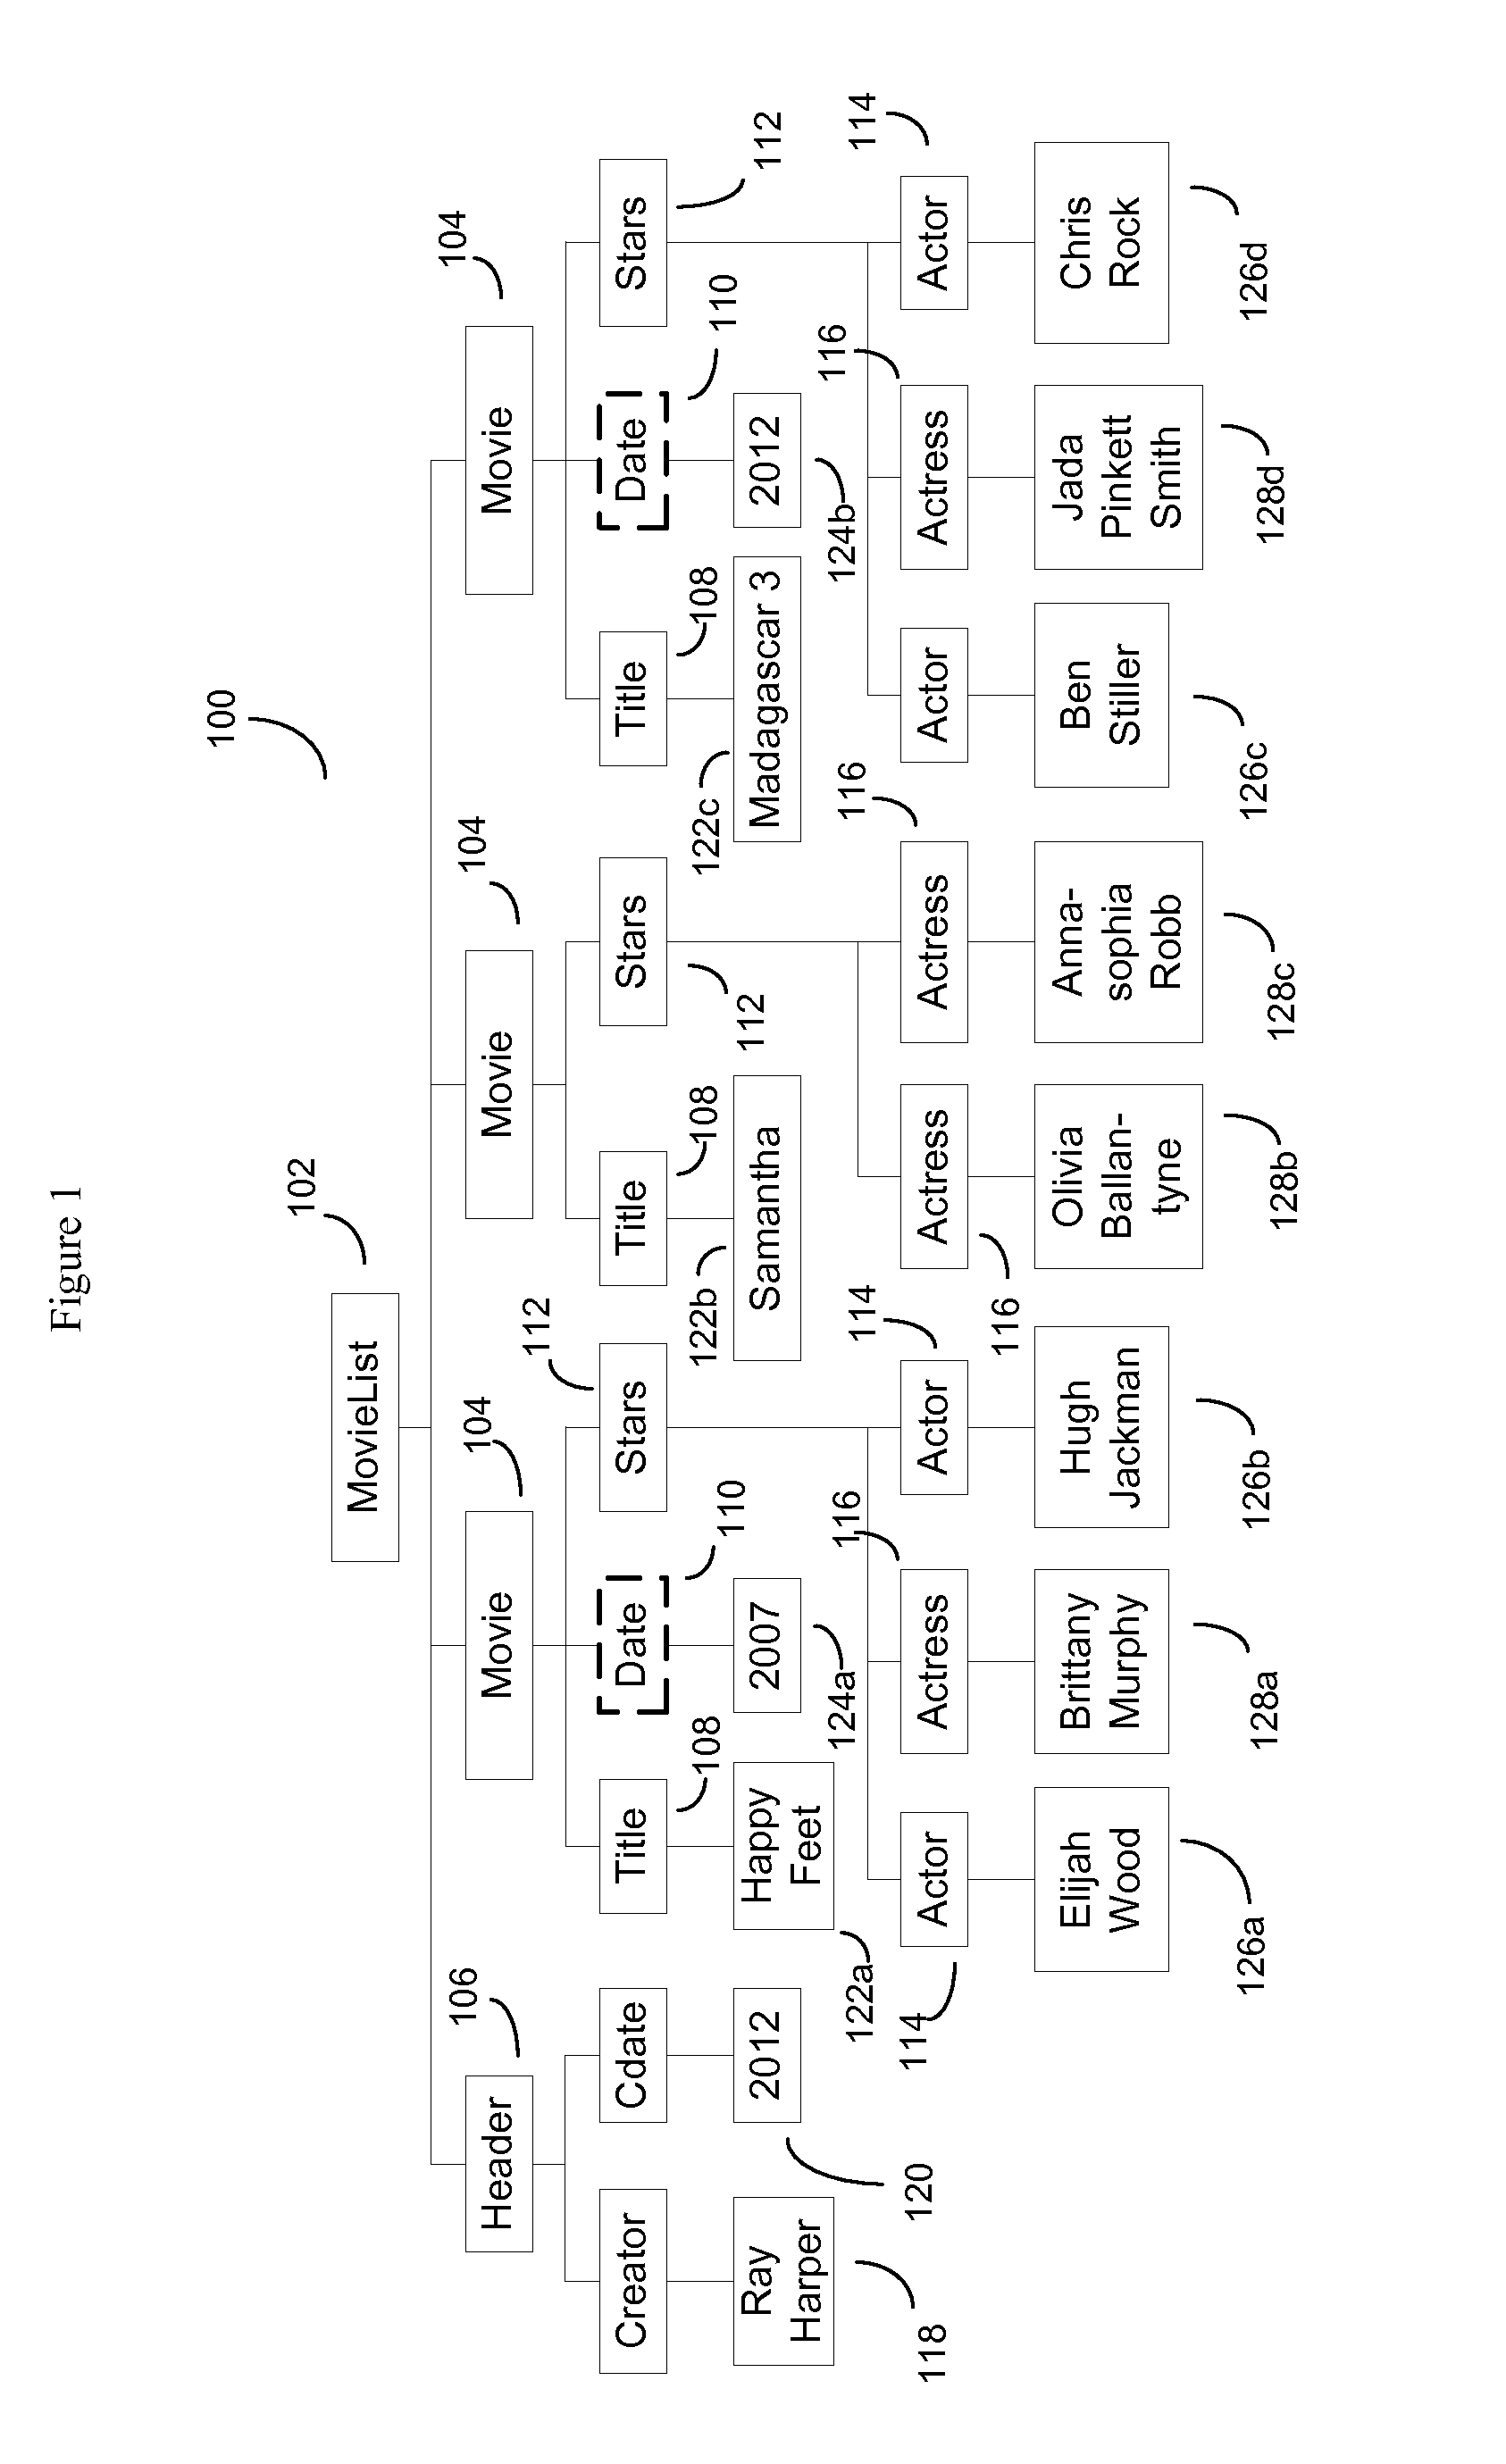 Method for representing and storing hierarchical data in a columnar format